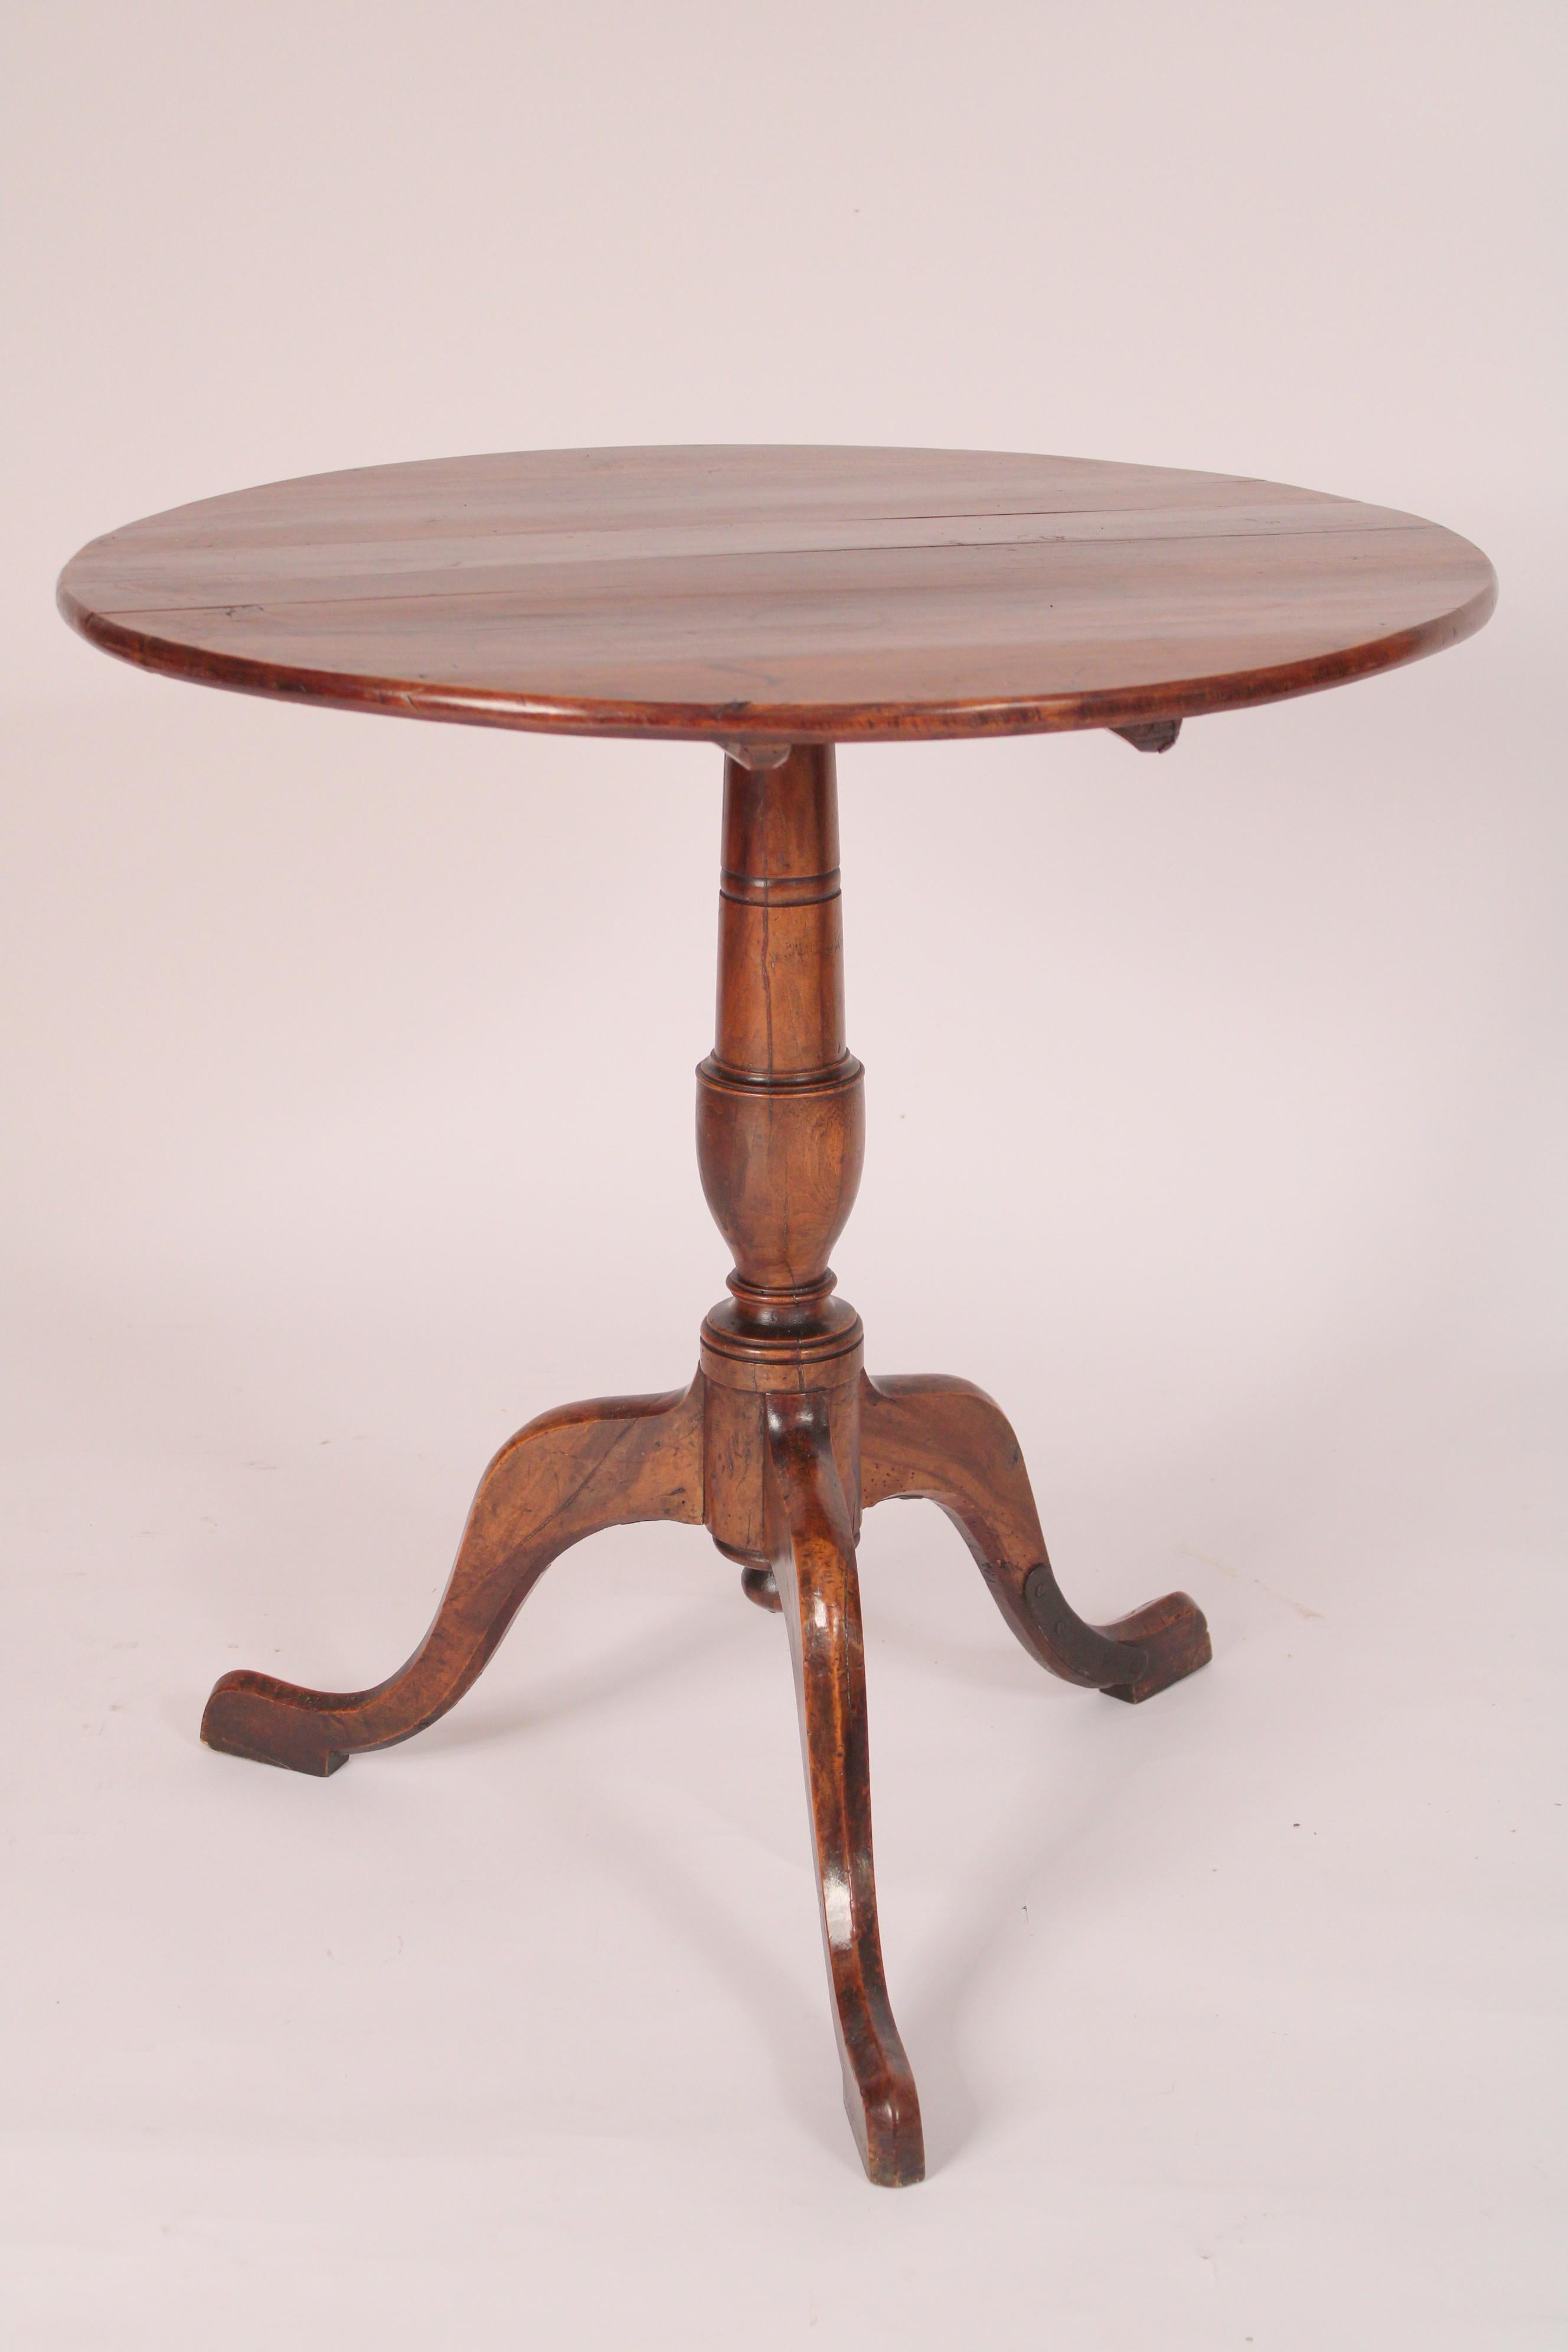 George III fruit wood tilt top table, 18th century. With a circular 5 board top, a vase shaped pedestal and 3 down swept legs. Not 100% sure of the wood it looks like yew, fruit wood or beech, nice old color.